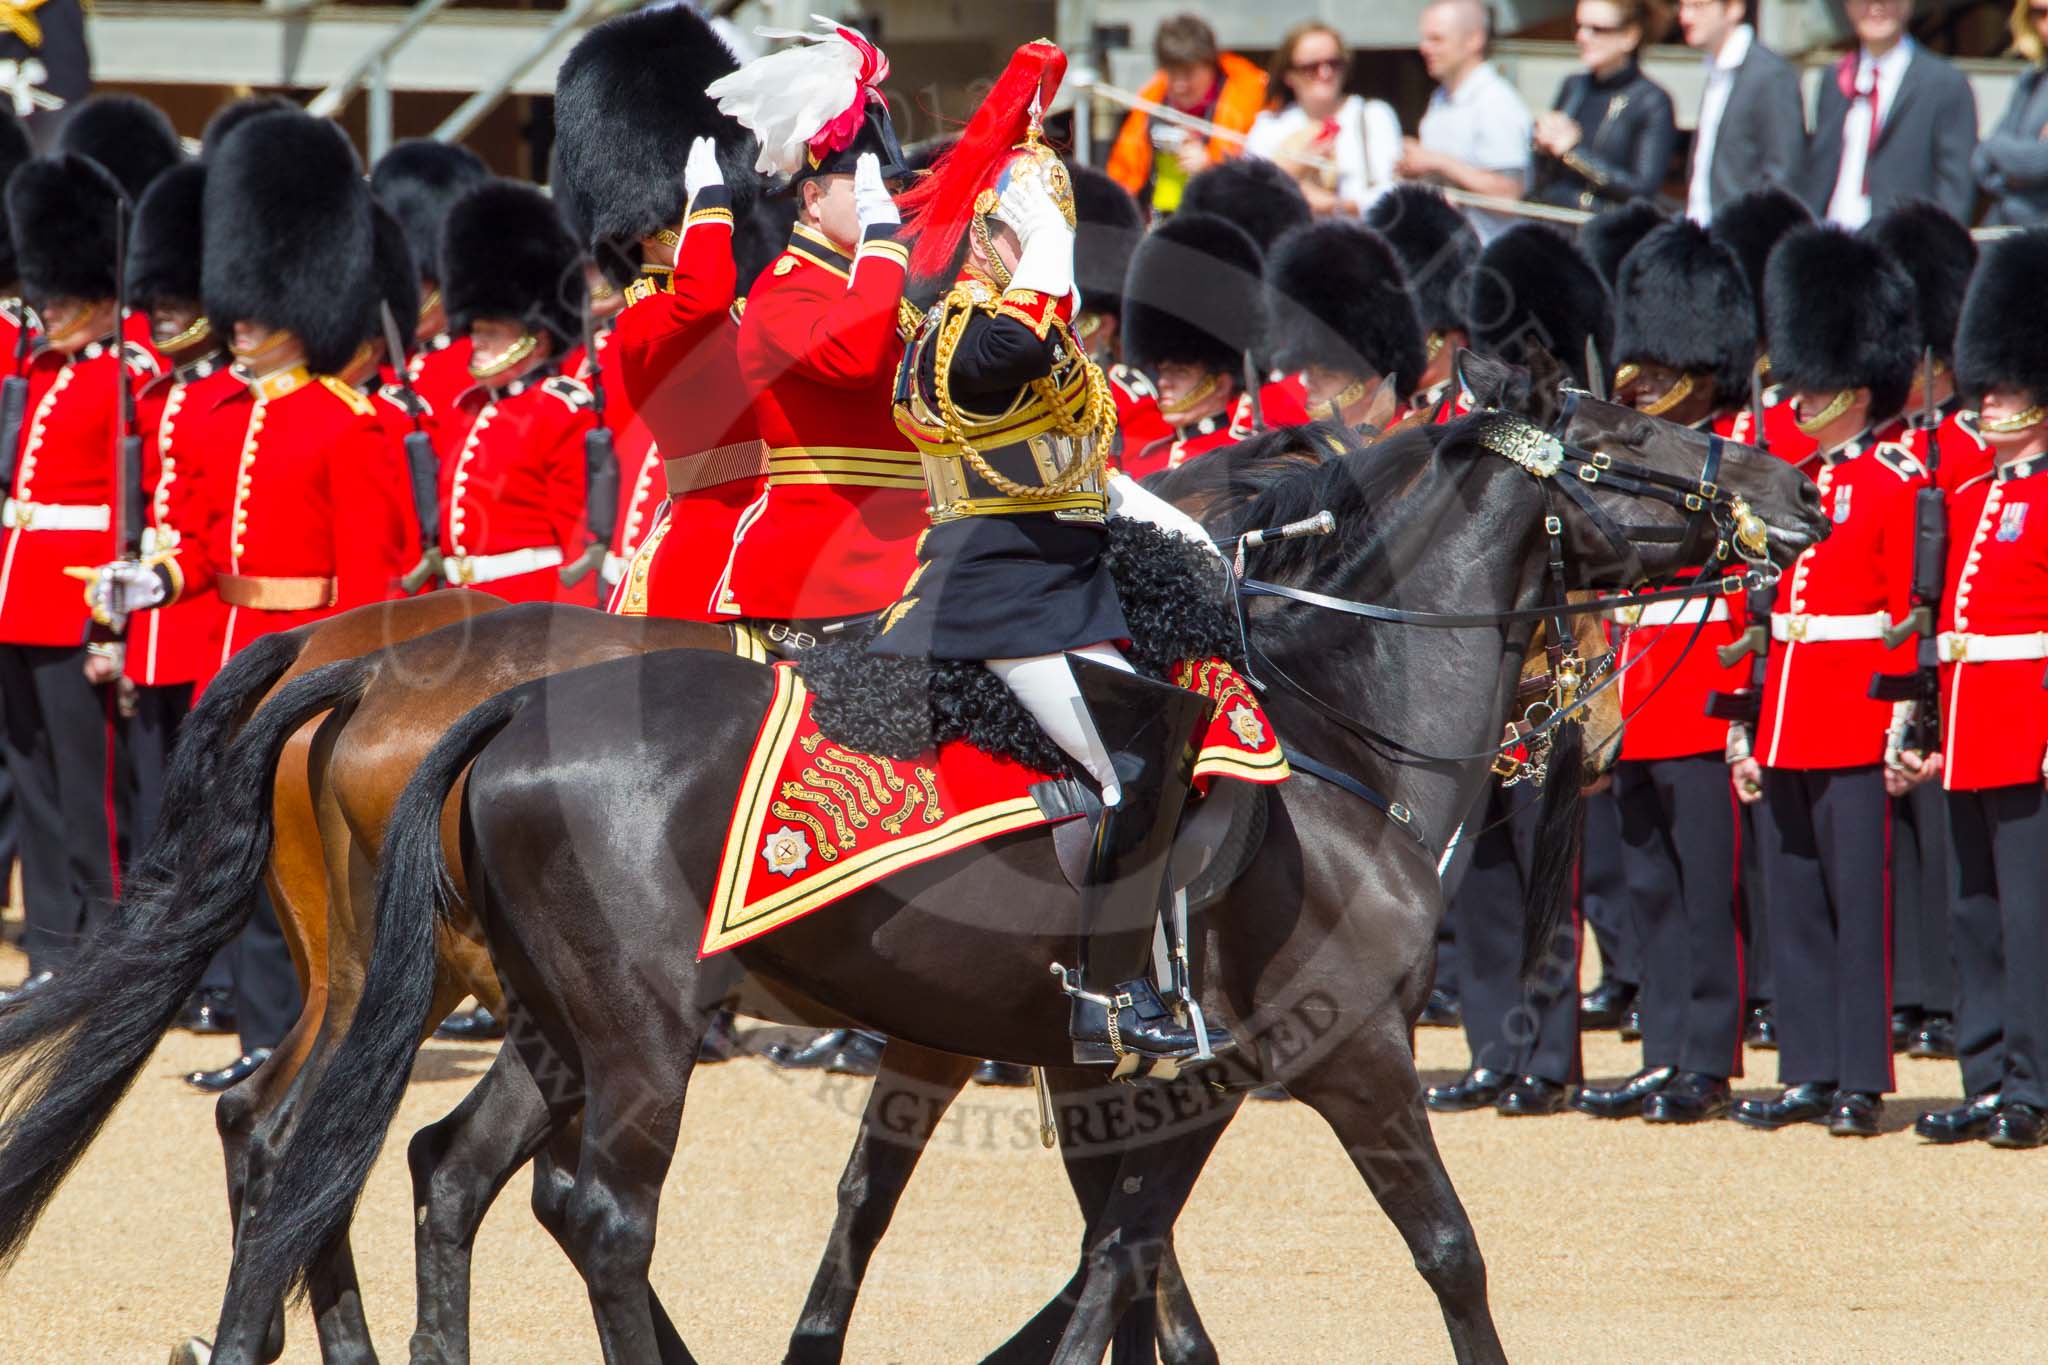 The Colonel's Review 2013: The Silver-Stick-in-Waiting, Colonel Stuart Cowen, The Blues and Royals, the Chief of Staff, Colonel Hugh Bodington, Welsh Guards, and Aide-de-Camp, Captain John James Hathaway-White, Grenadier Guards, saluting the Colour during the Inspection of the Line..
Horse Guards Parade, Westminster,
London SW1,

United Kingdom,
on 08 June 2013 at 11:04, image #370